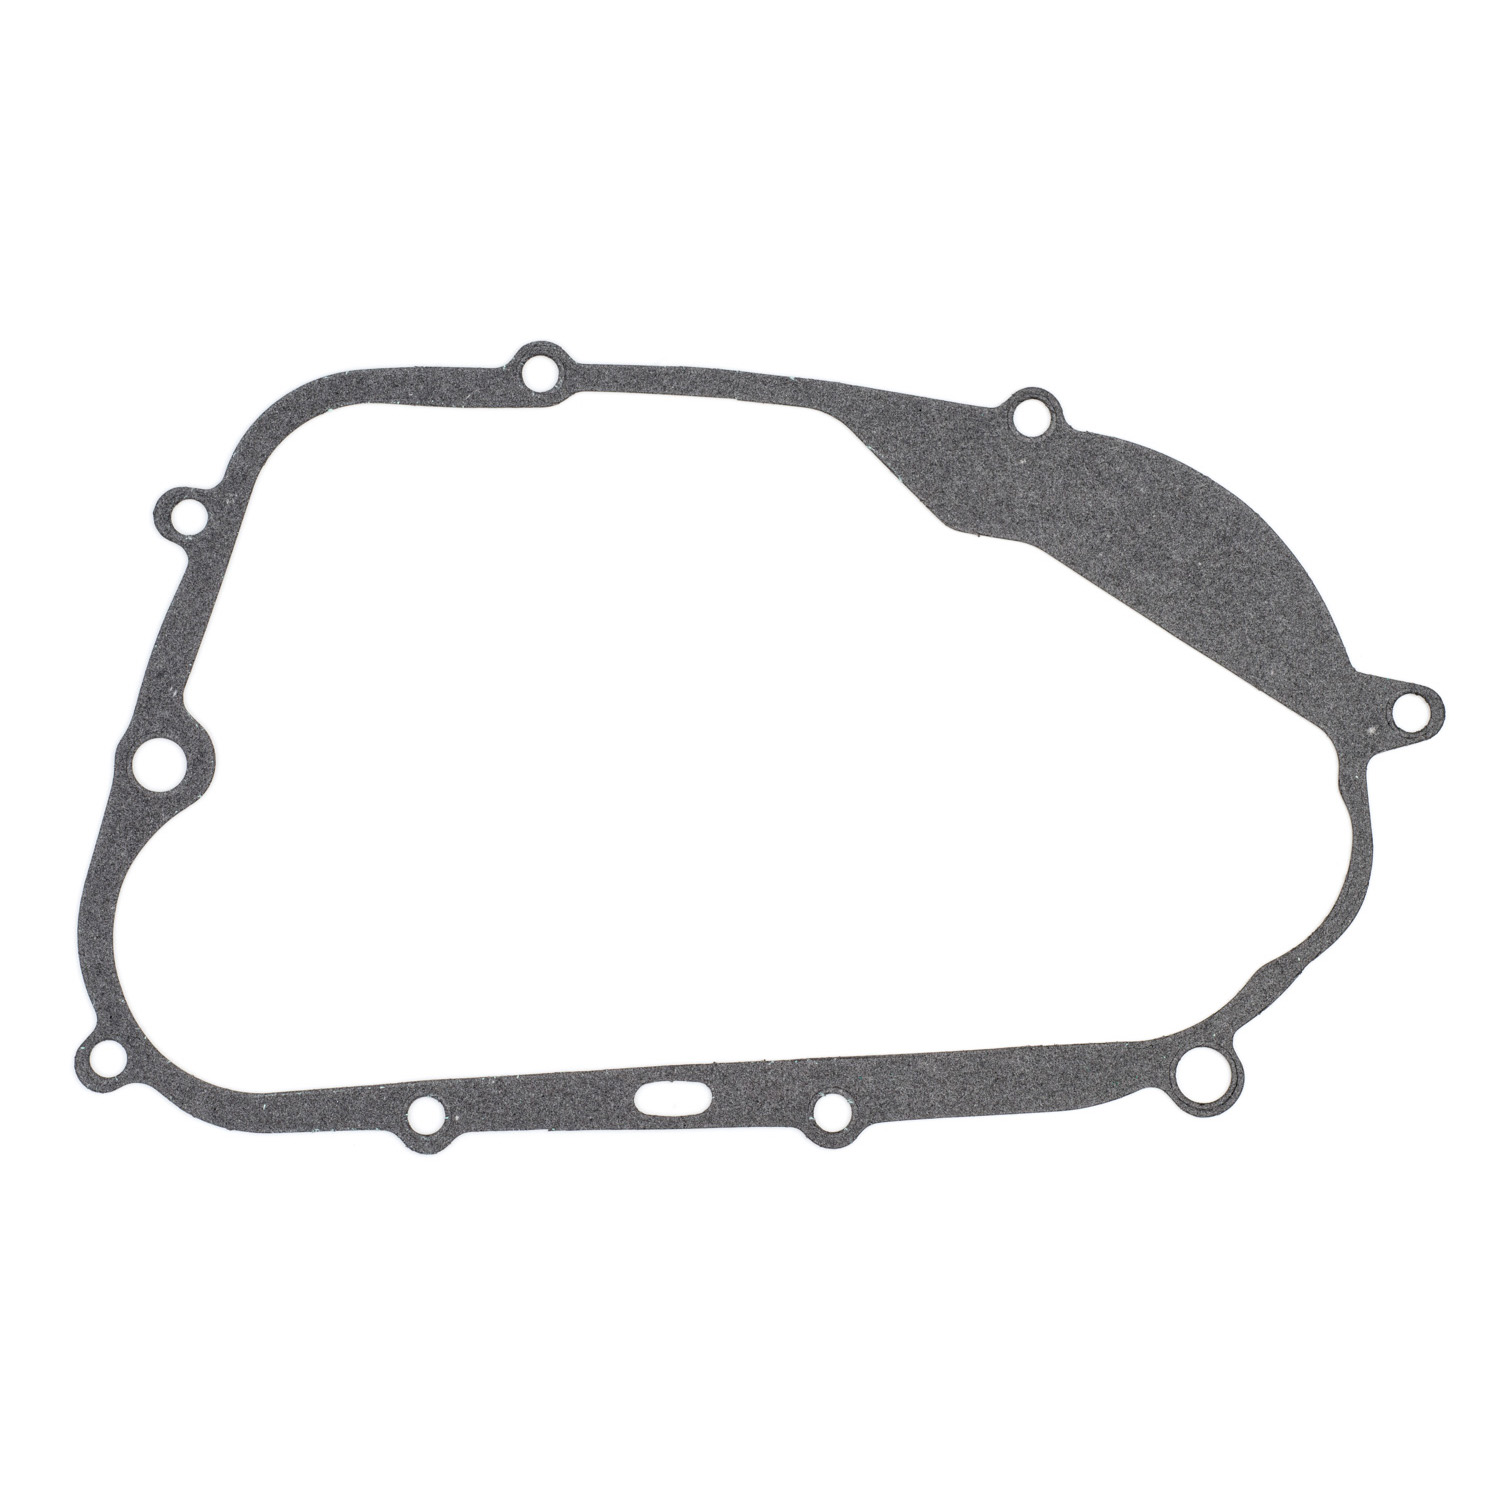 DT80MXS Clutch Cover Gasket